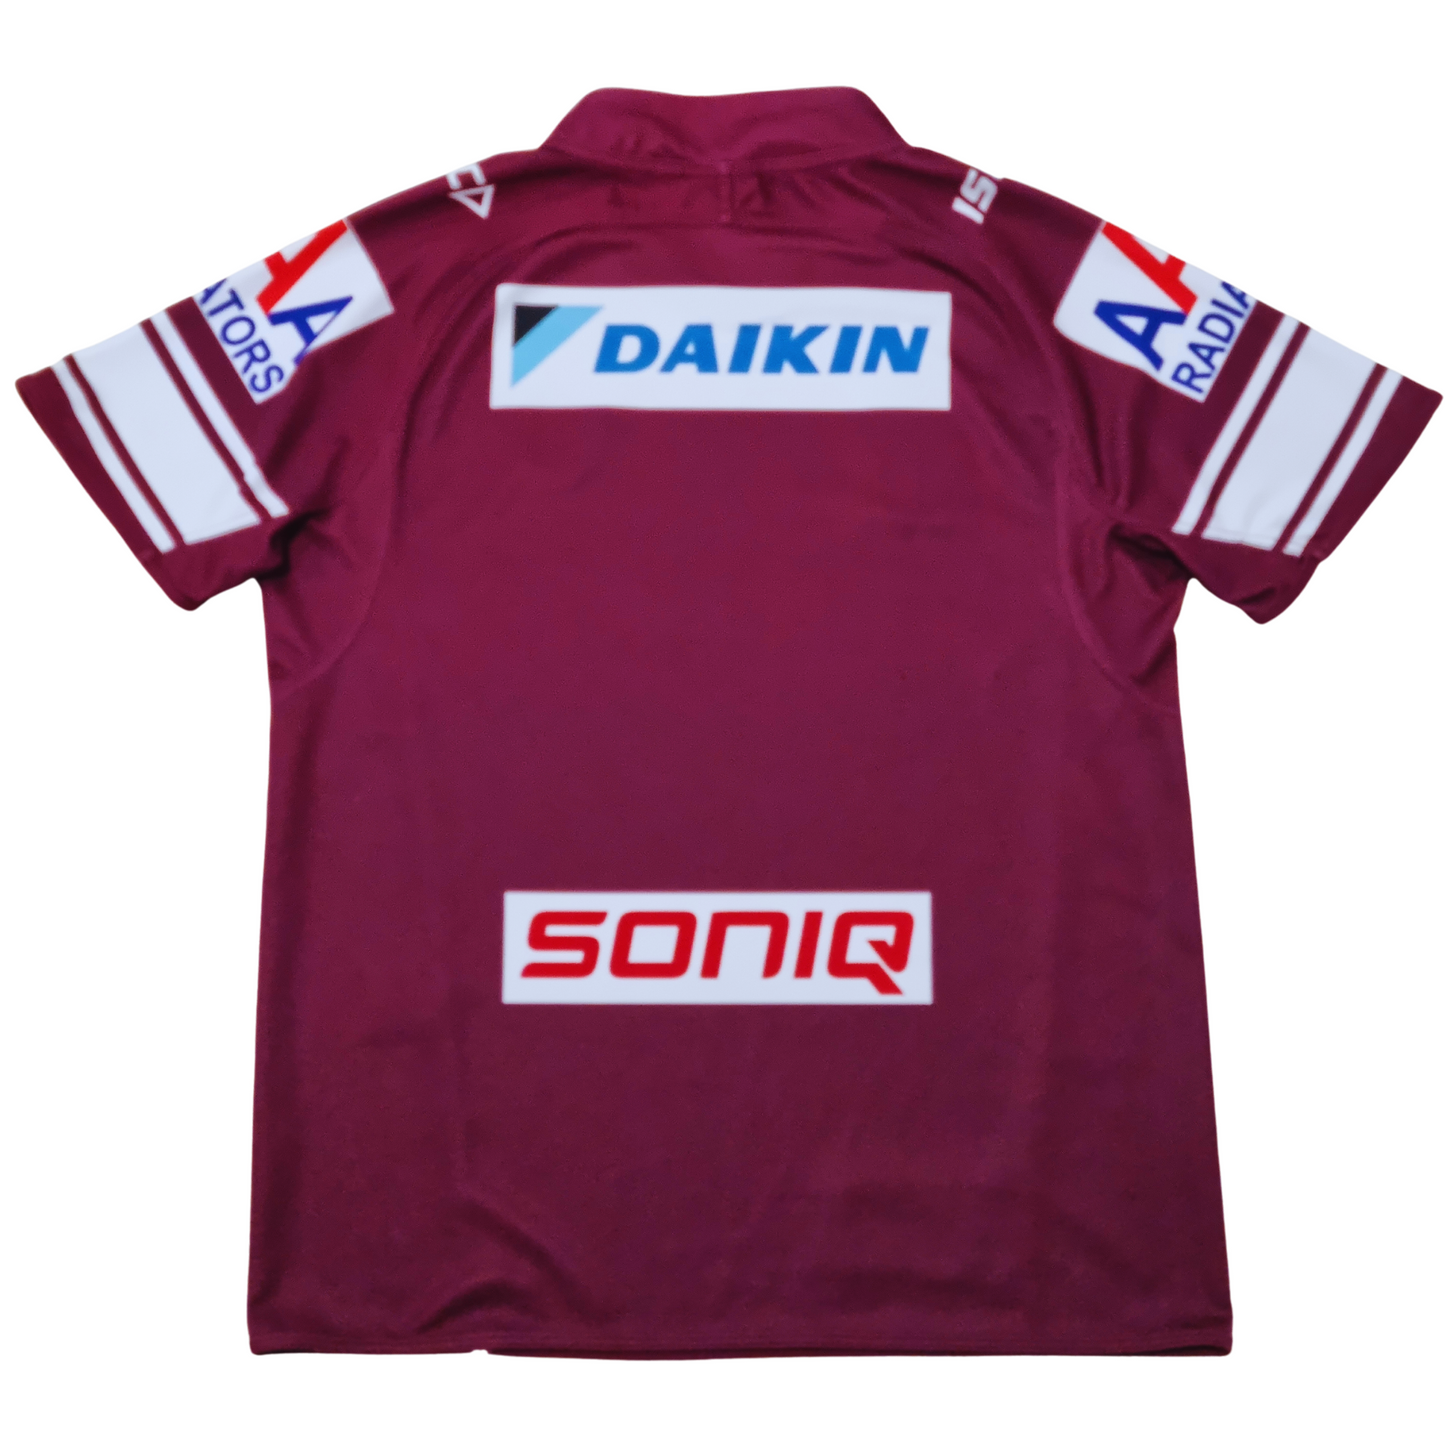 Manly Sea Eagles 2014 Home Jersey Back | Upcycled Locker